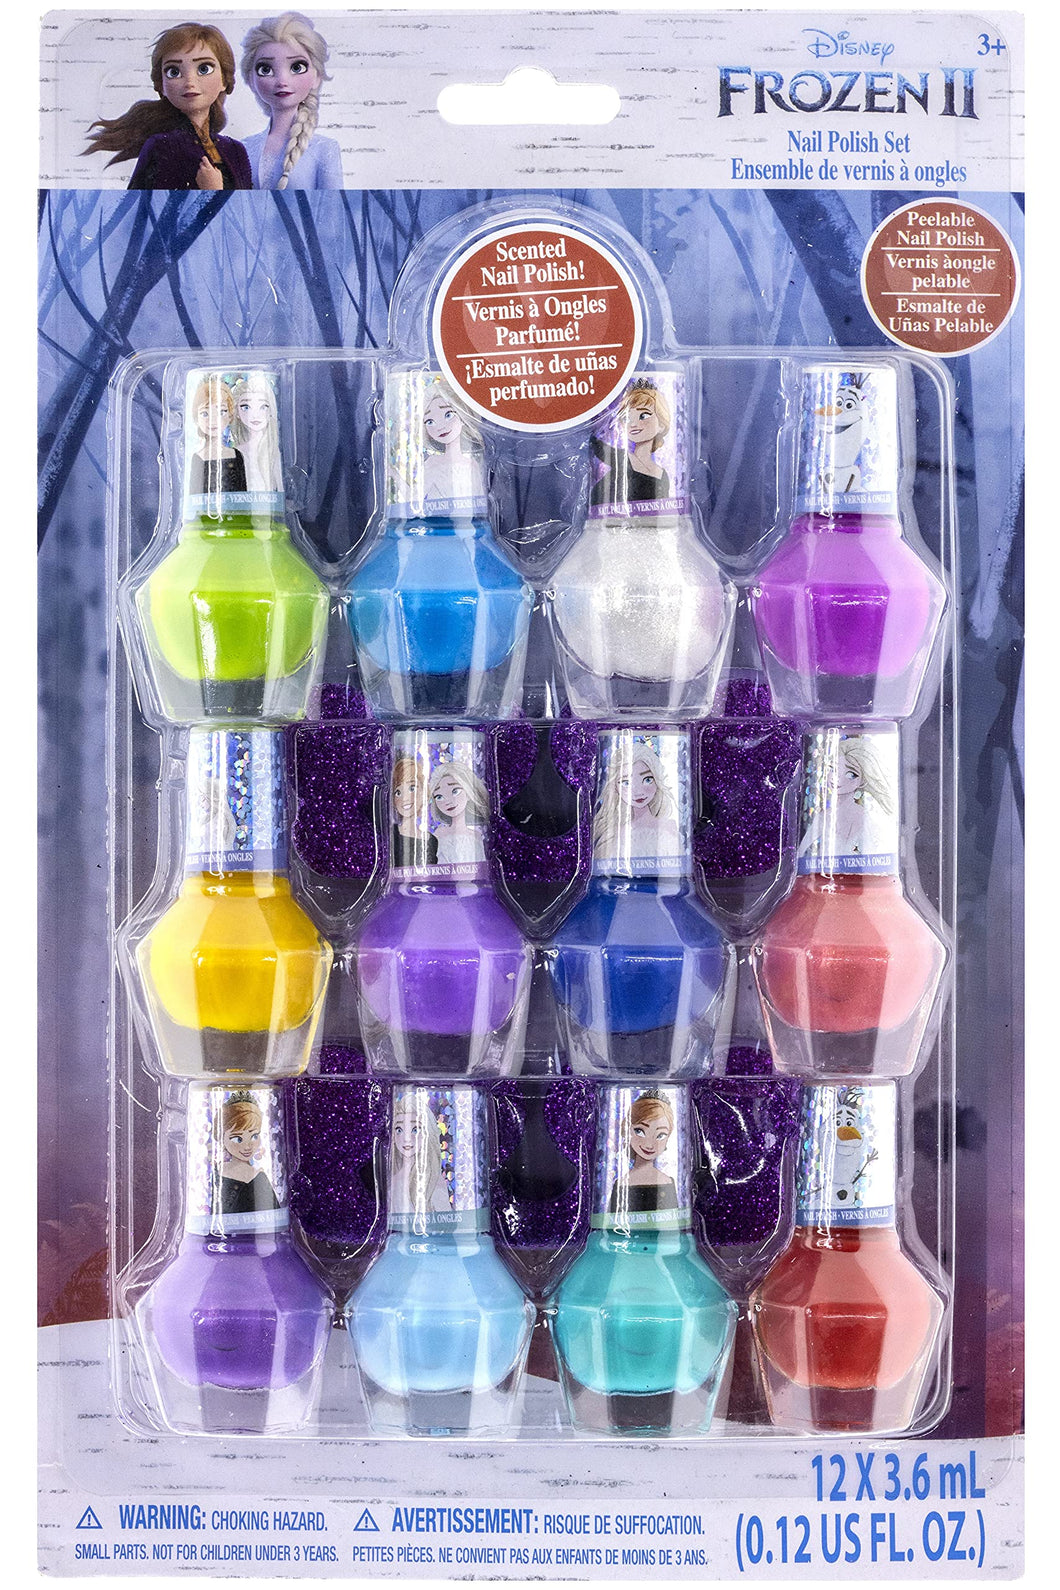 Townley Girl Disney Frozen Non-Toxic Peel-Off Water-Based Natural Safe Quick Dry Nail Polish Gift Kit Set for Kids Girls Set With Bonus Nail Separators, 12 Pcs (All Solid Colors)